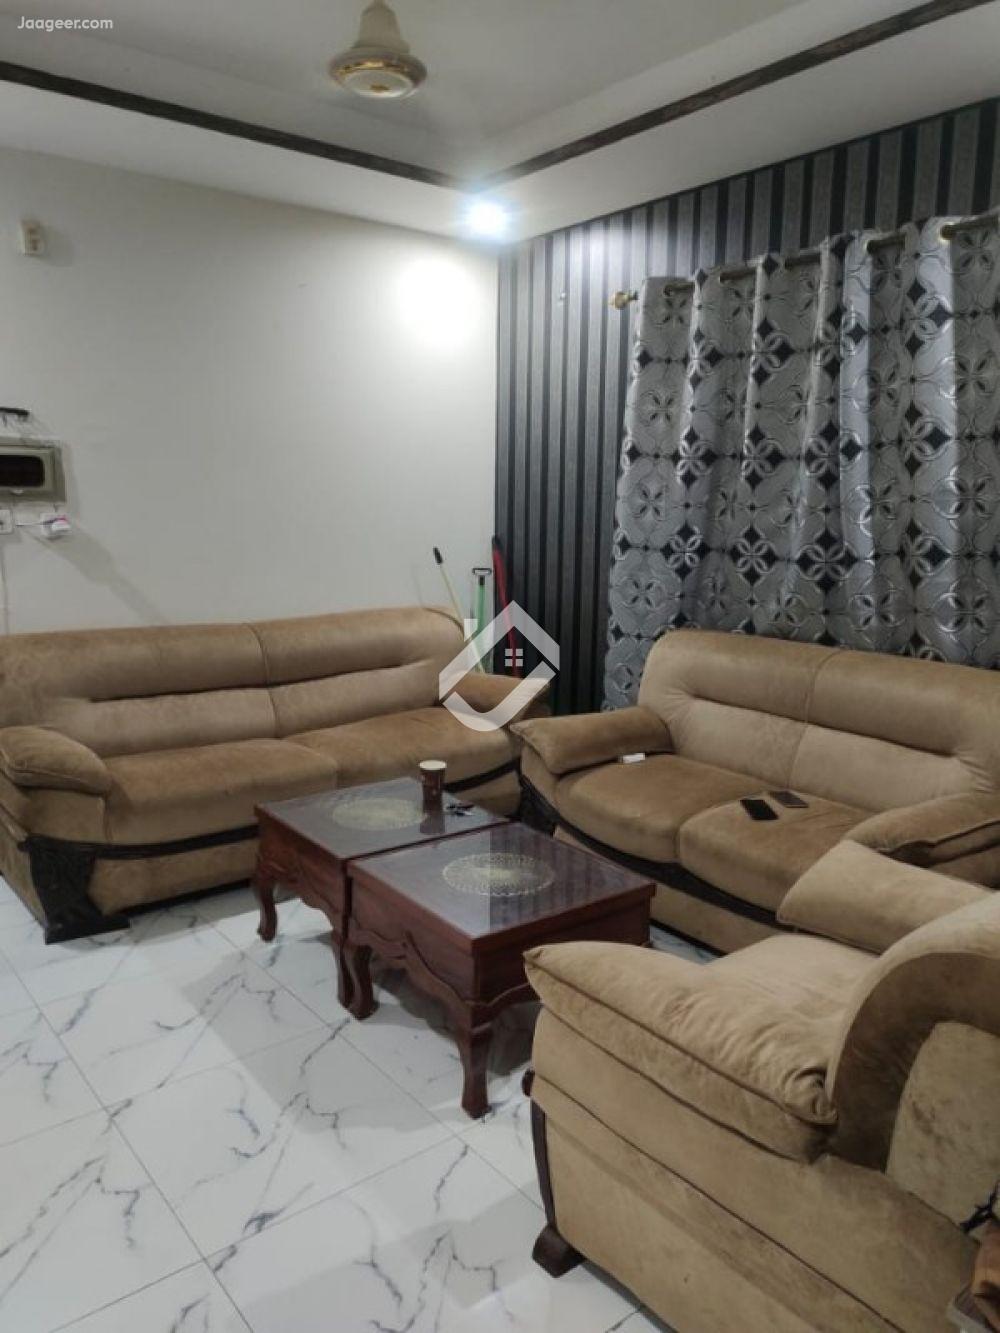 View  3 Bed Furnished Apartment For Rent In E 112 in E-112, Islamabad